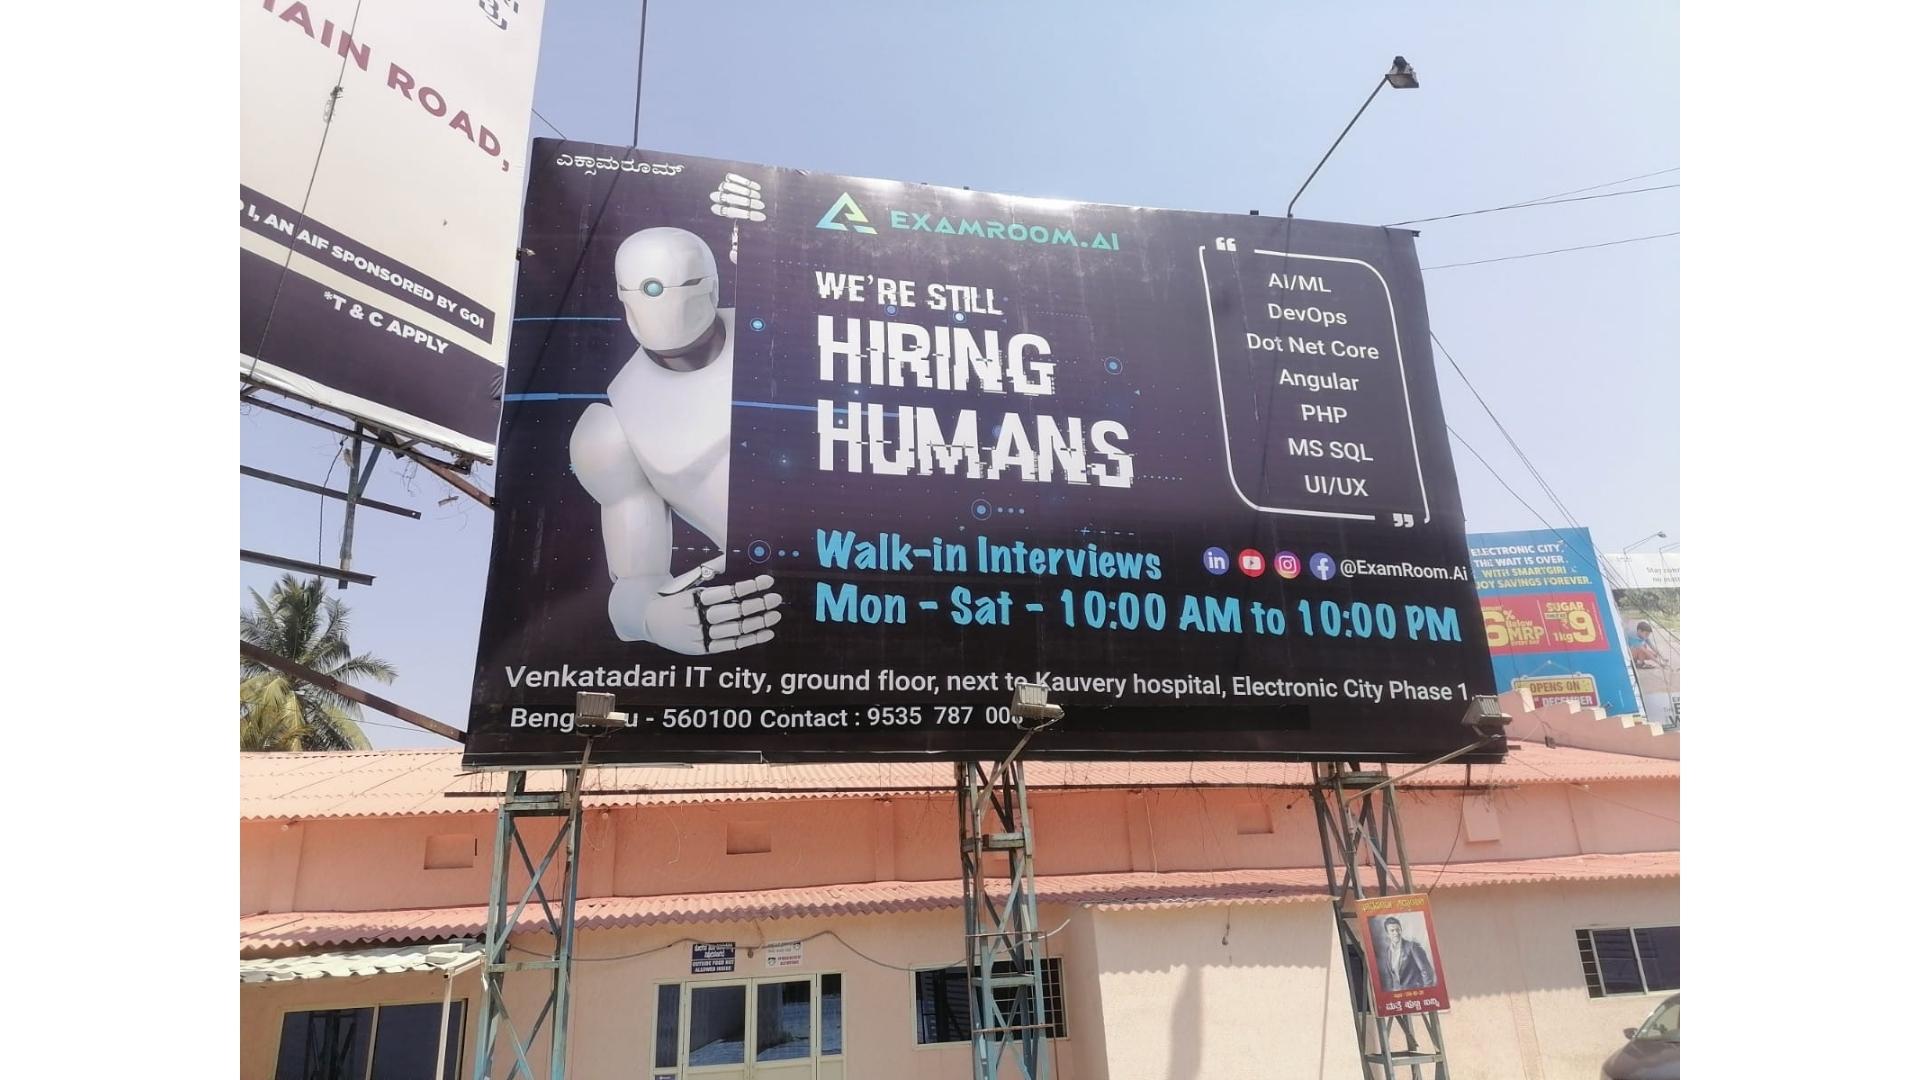 outdoor-advertising-for-examroom.ai